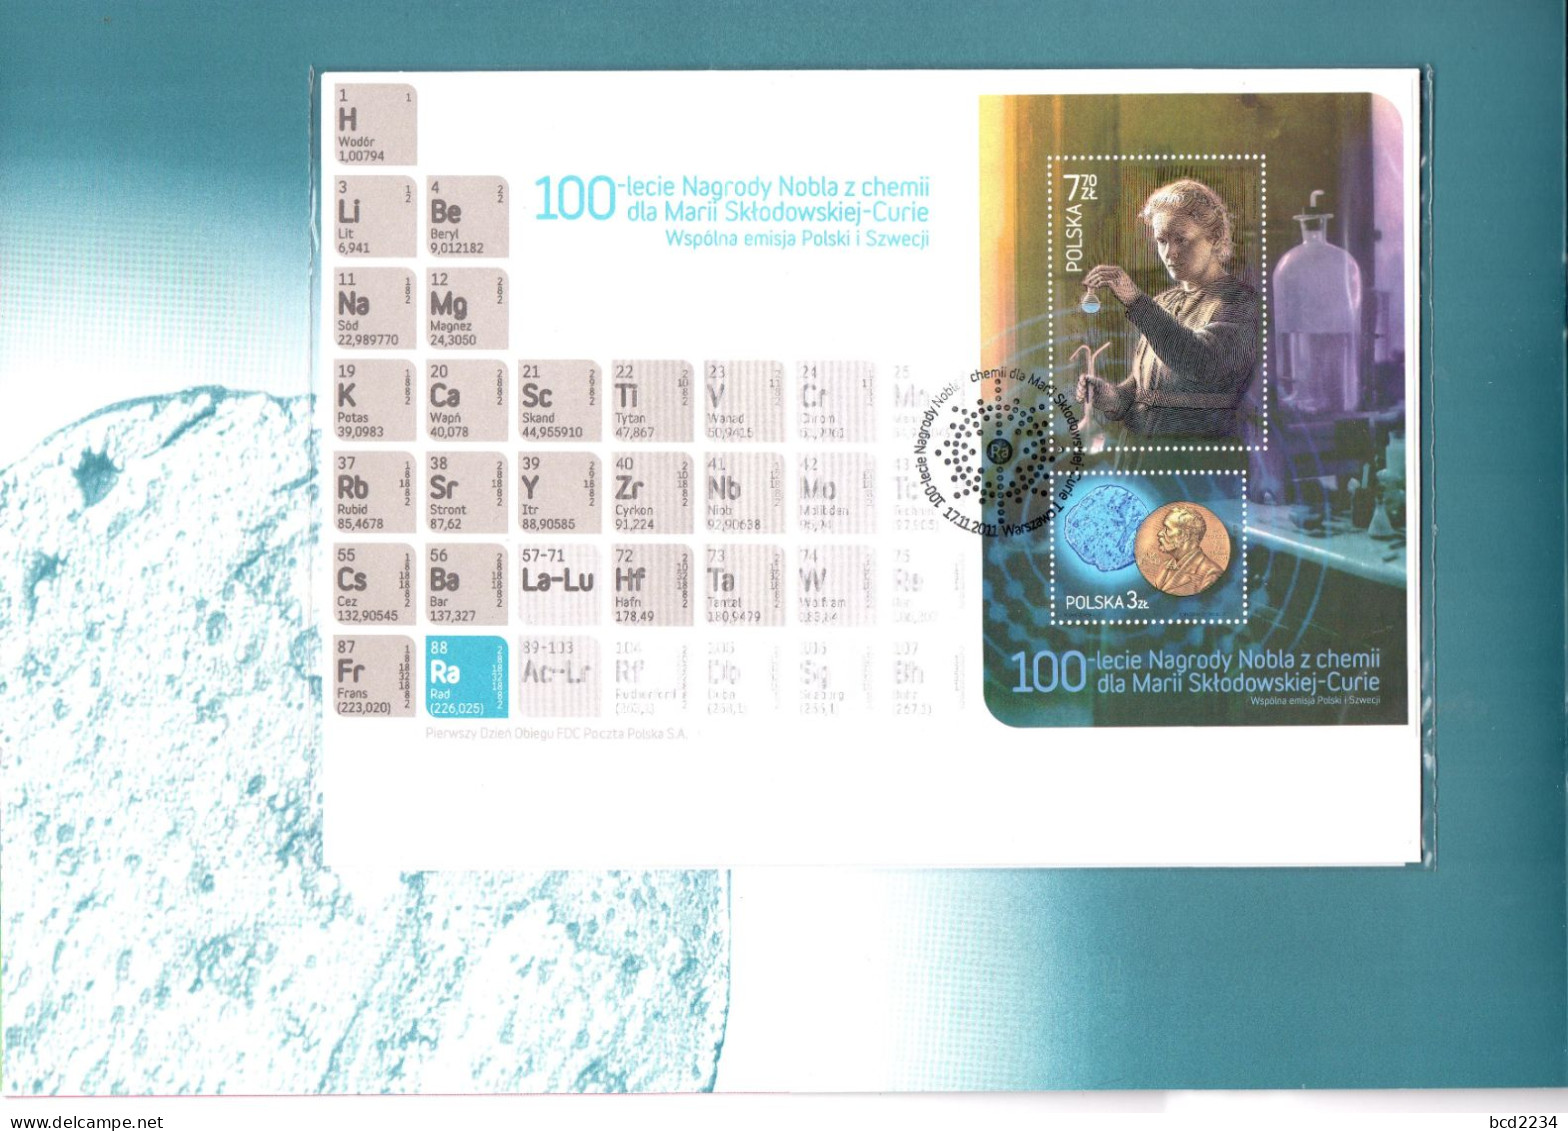 POLAND 2011 LIMITED EDITION: RARE 100TH ANNIVERSARY MARIE CURIE NOBEL PRIZE CHEMISTRY FOLDER FDC MS PL SWEDEN - FDC